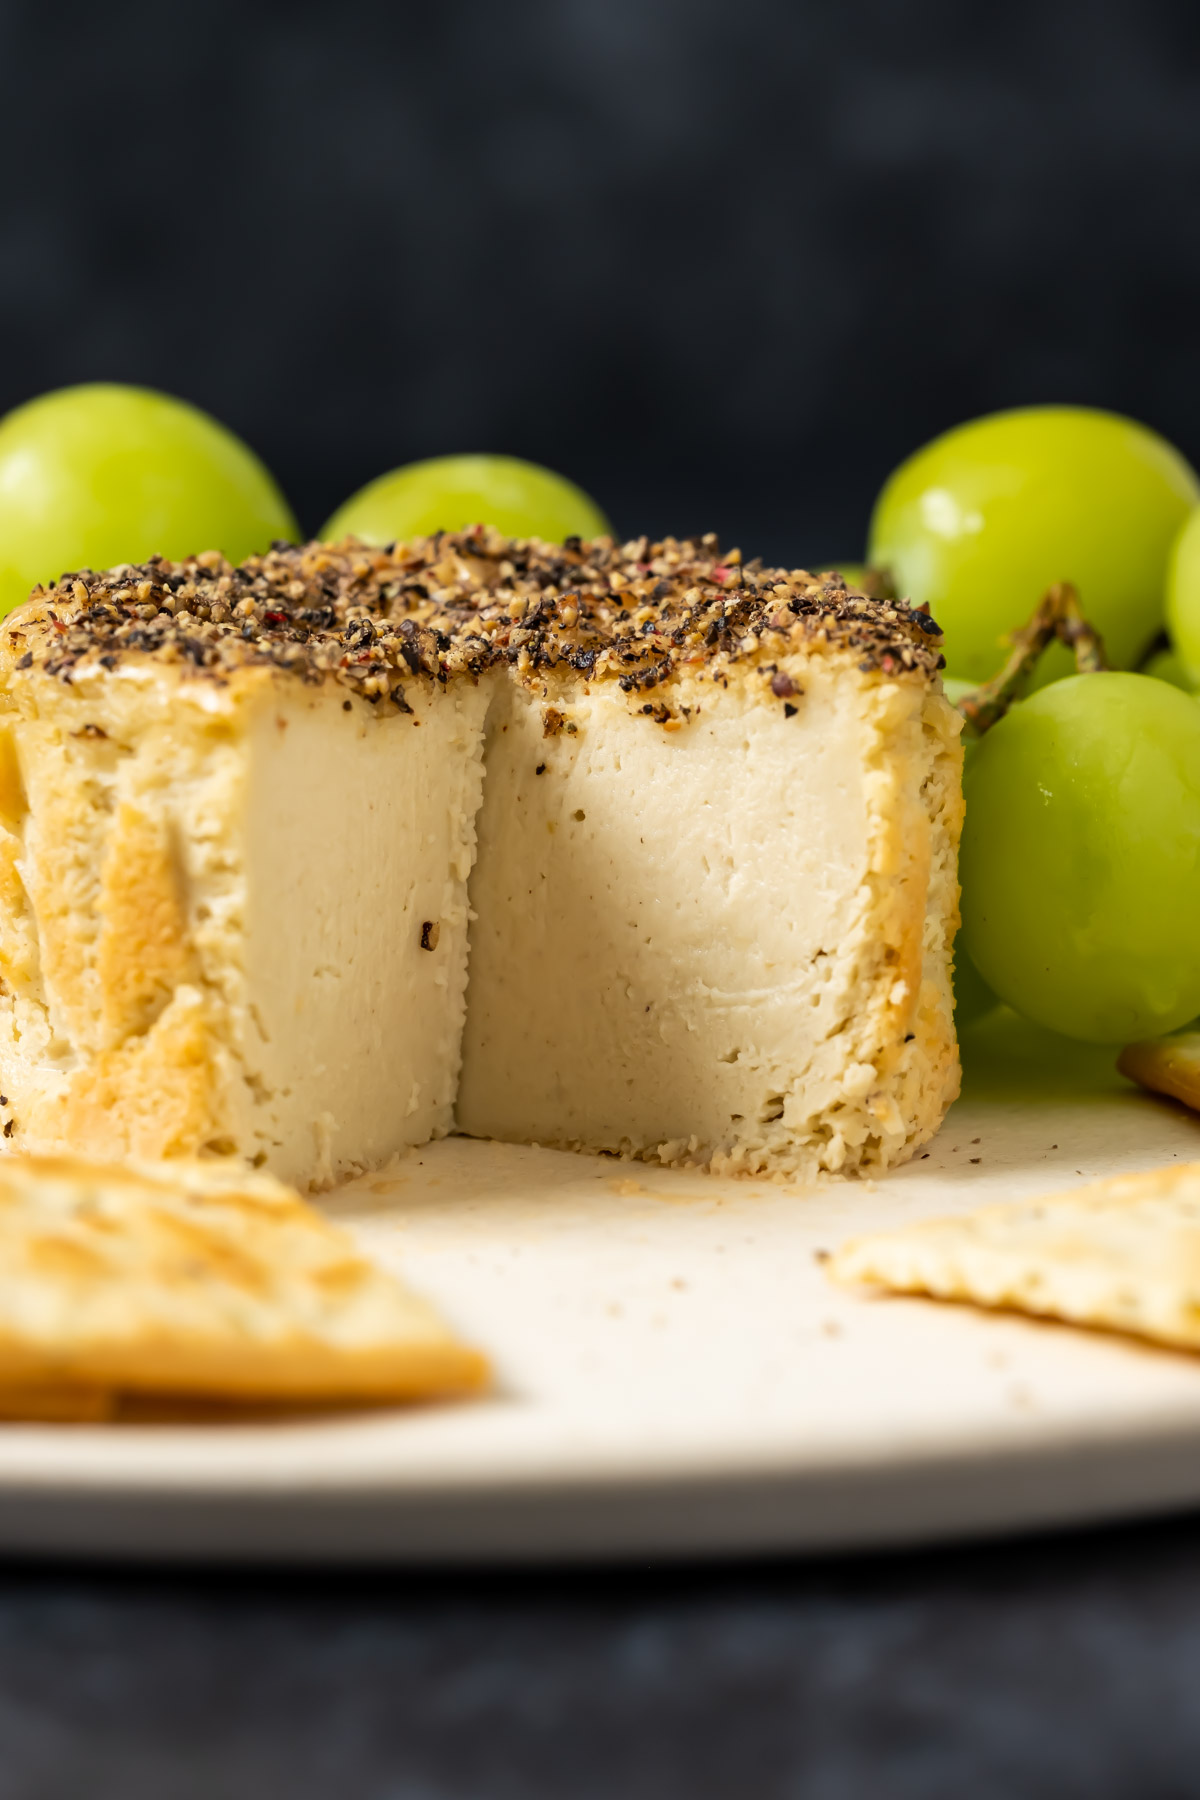 Vegan camembert with slices removed on a white plate with crackers and grapes.